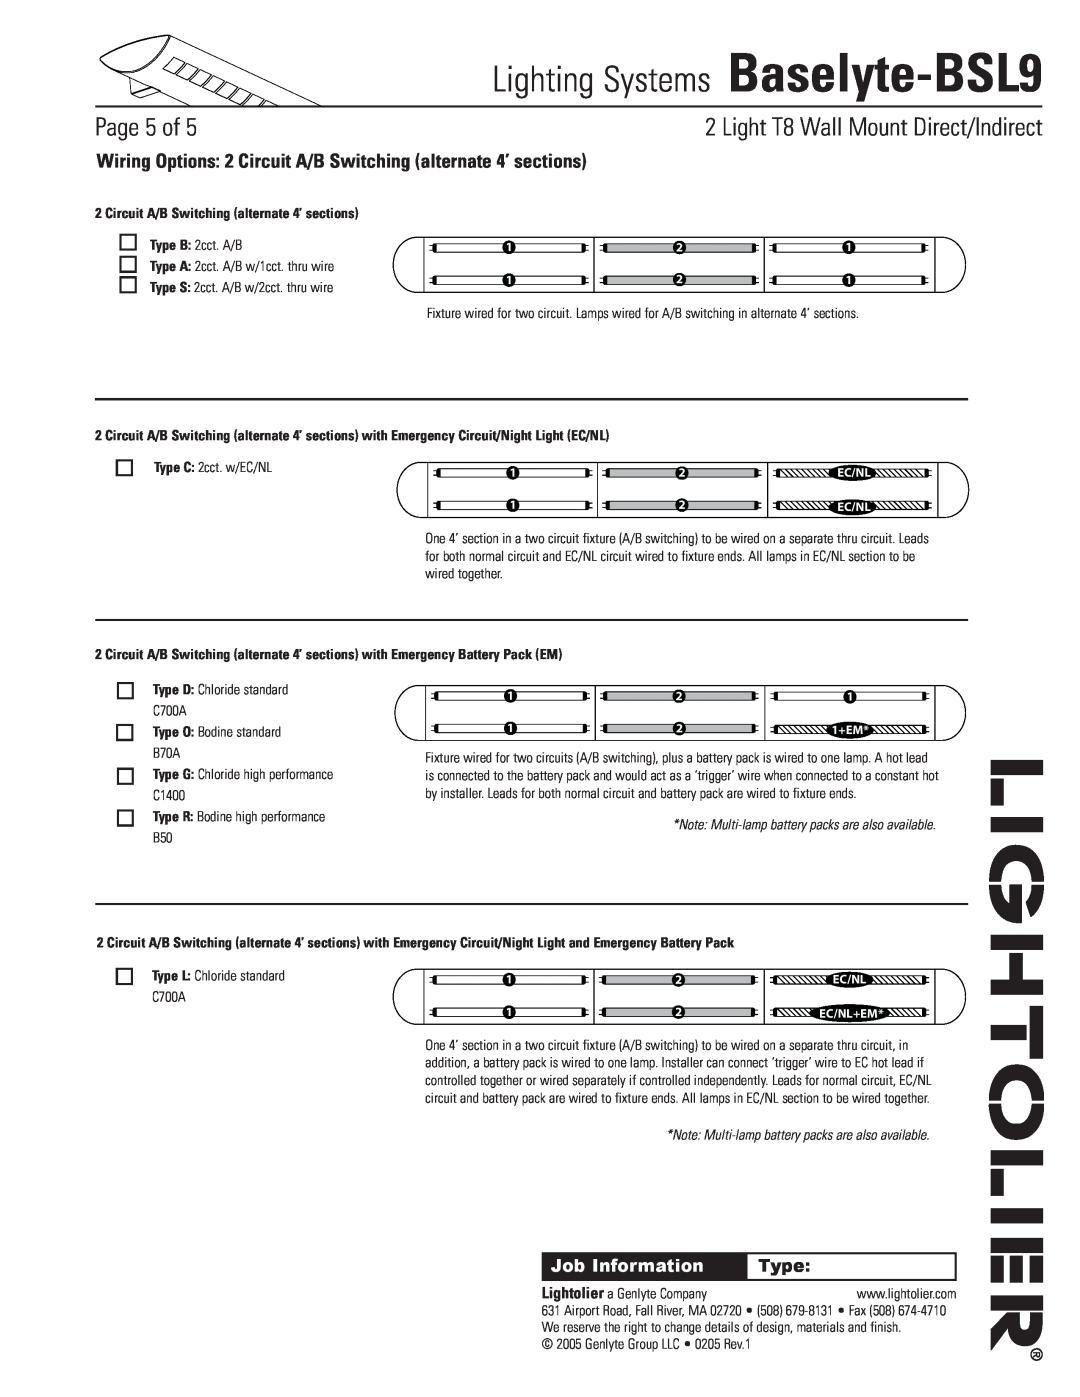 Lightolier Baselyte-BSL9 specifications Circuit A/B Switching alternate 4’ sections, Type O Bodine standard B70A, Page of 